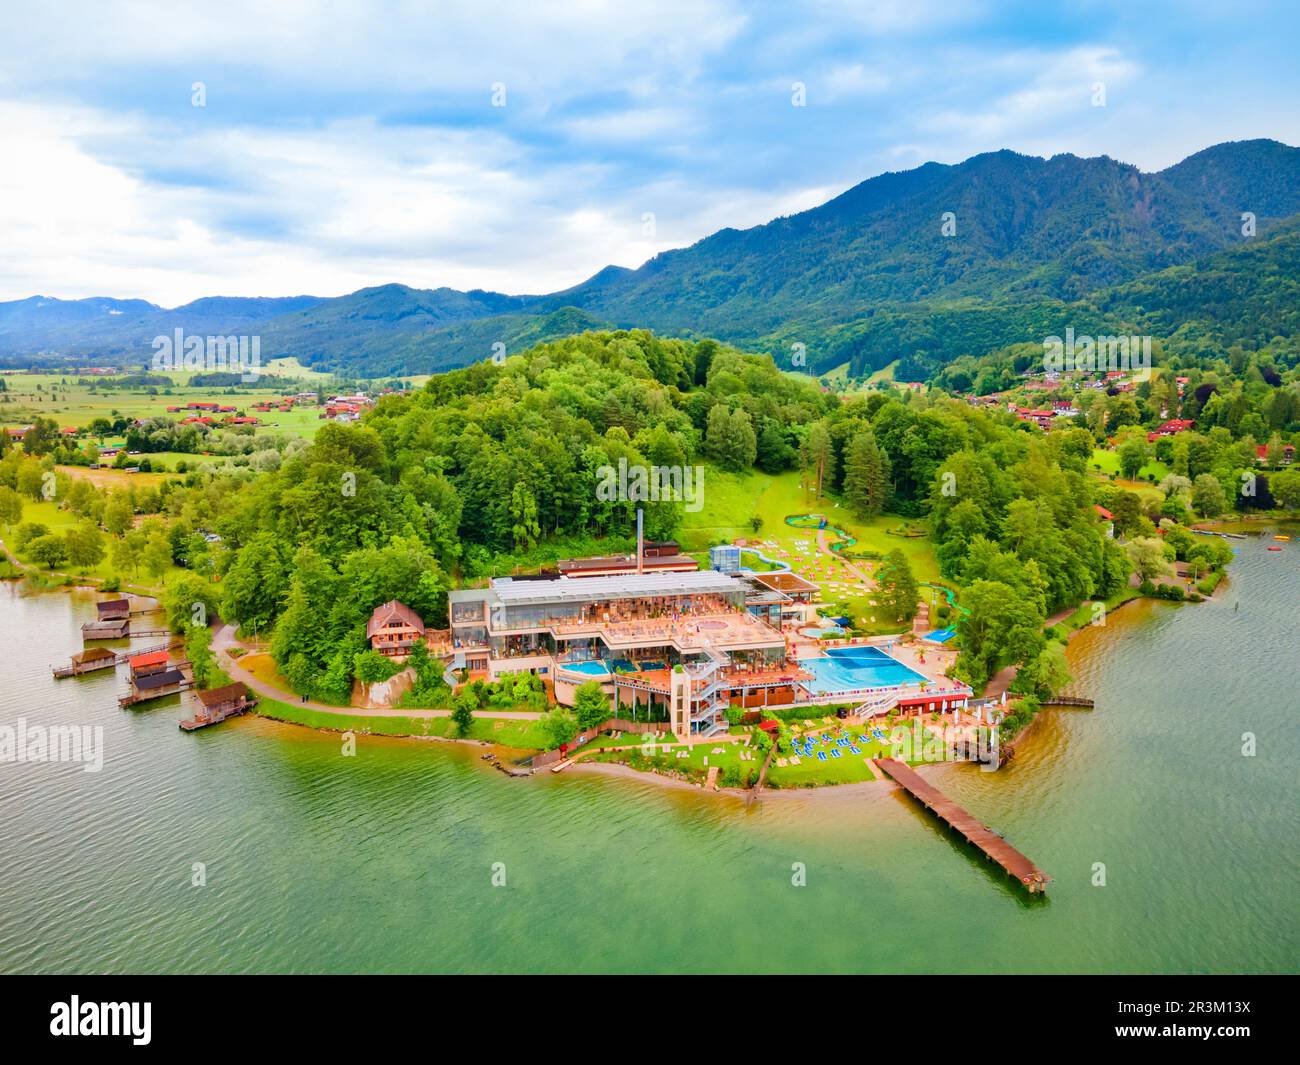 Kochel am See, Germany - July 01, 2021: Kristall Therme trimini aerial panoramic view. It is a thermal spa complex in Kochel am See at the Kochelsee o Stock Photo